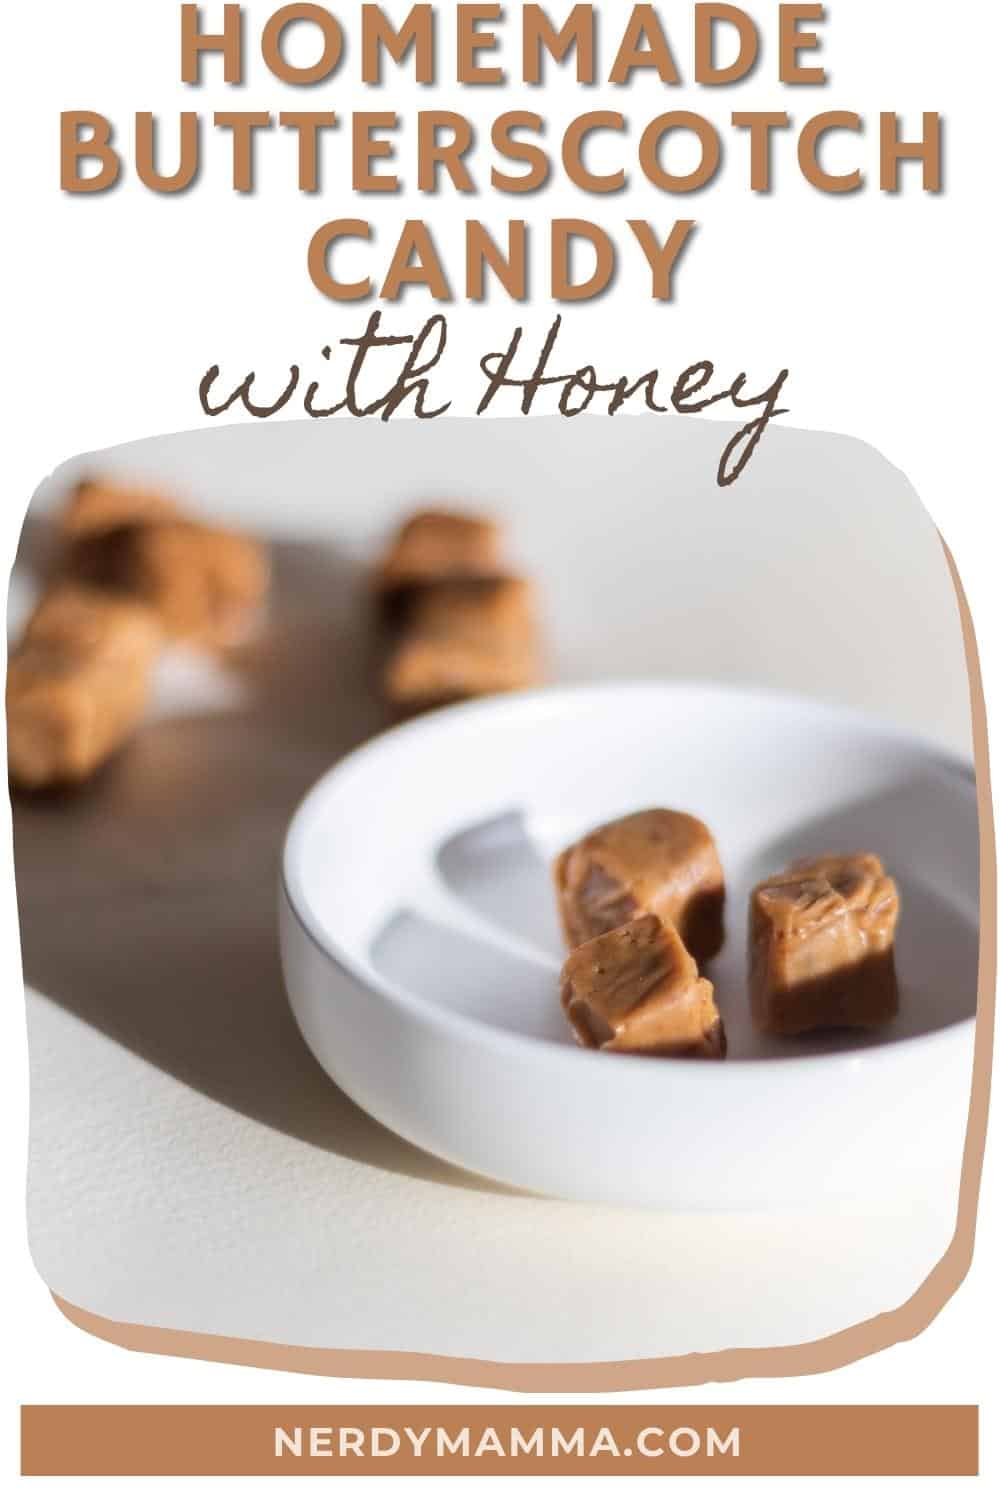 Homemade Butterscotch Candy with honey